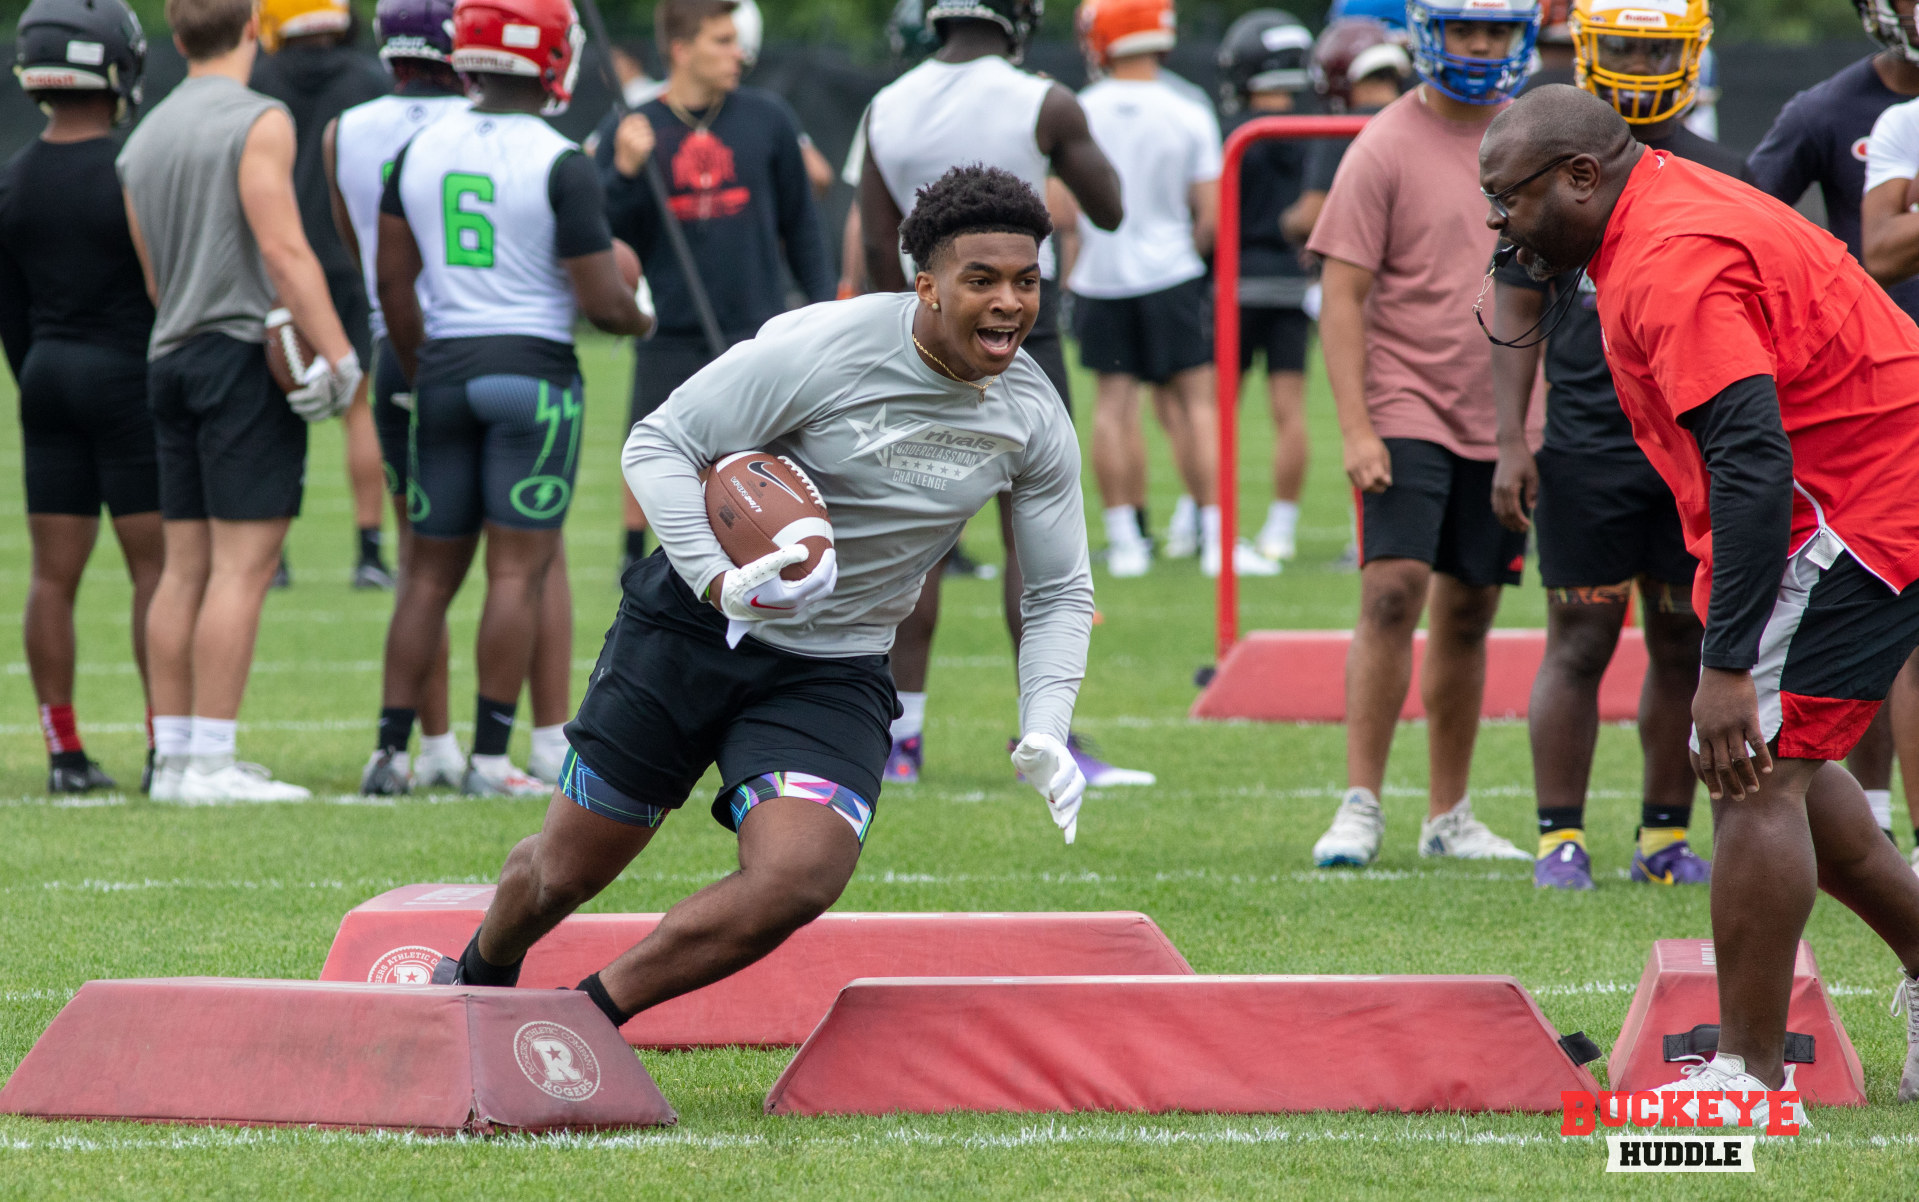 2025 Running Back Targets Showcased Skills At Ohio State Camp This Week